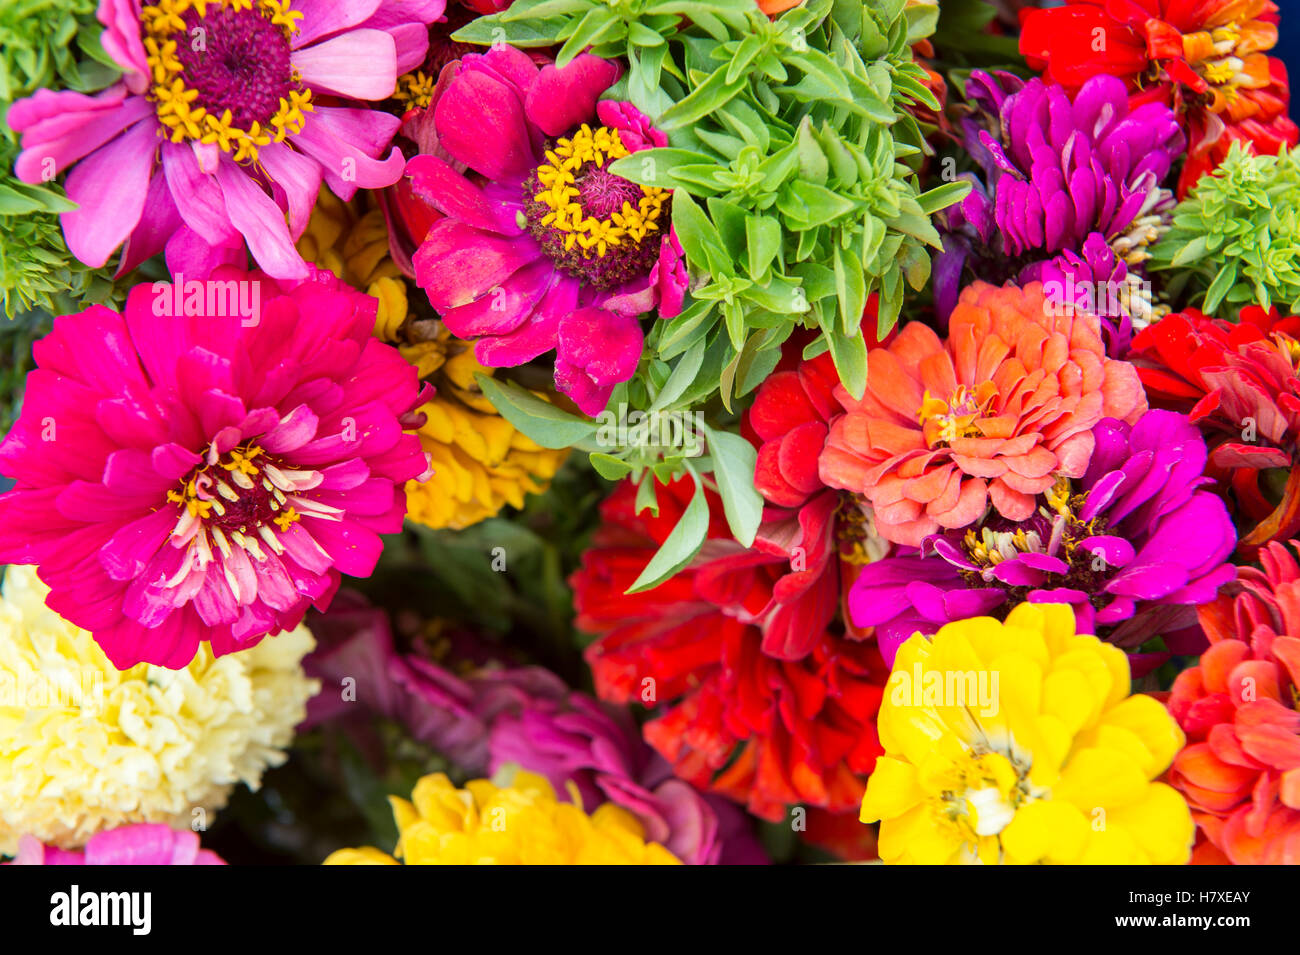 Bouquet of bright colorful flowers in a full frame close-up background Stock Photo